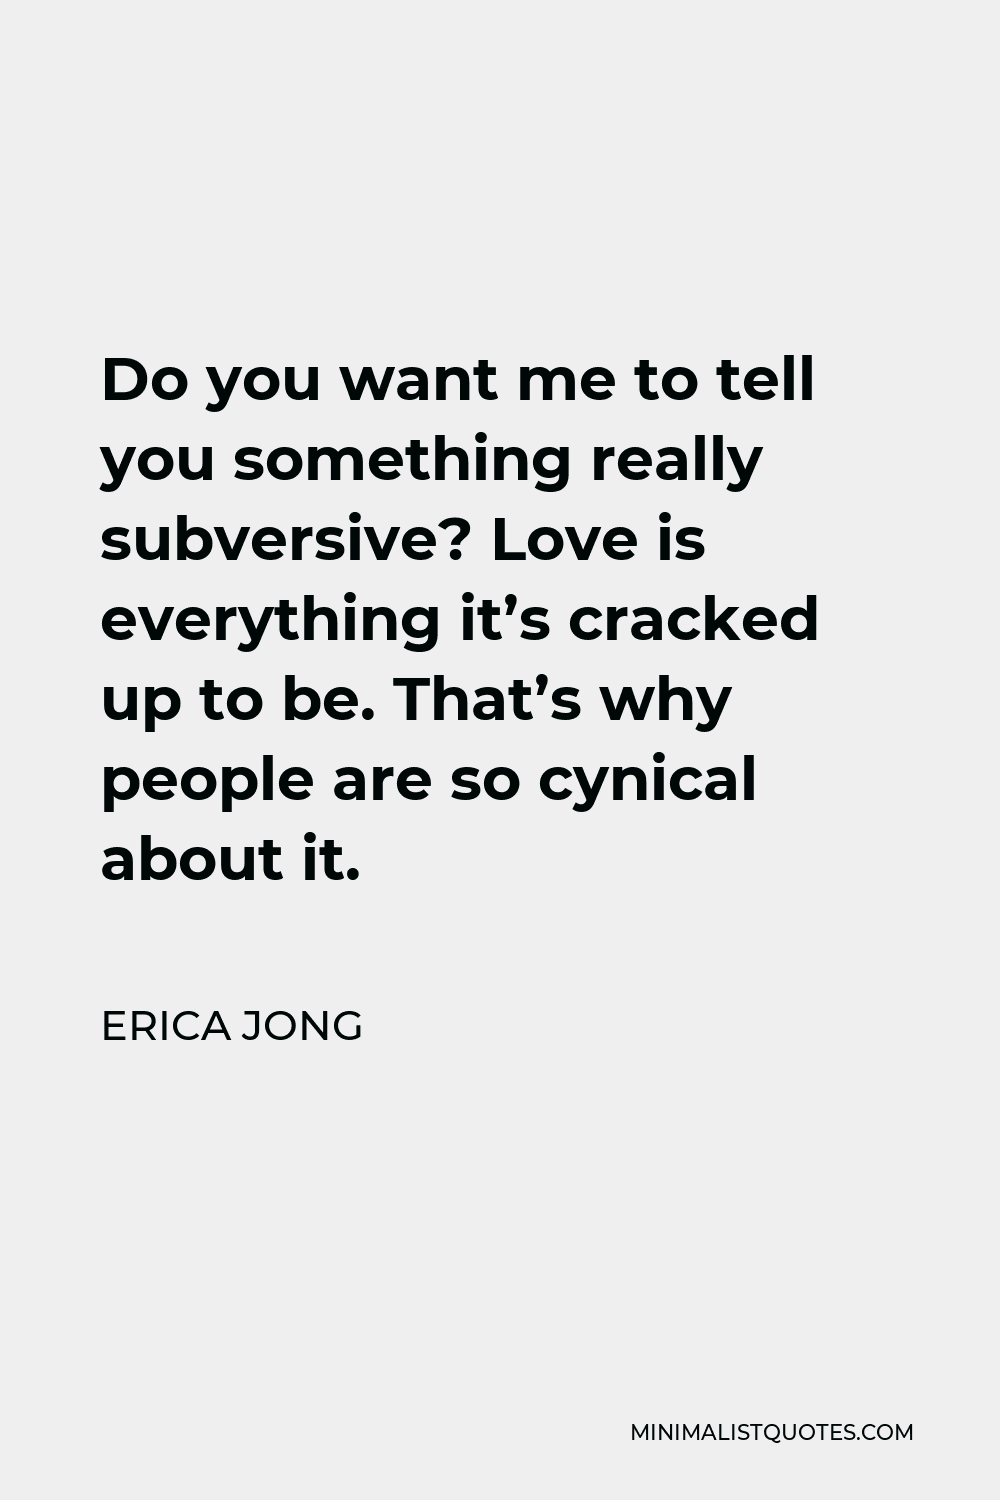 Erica Jong Quote - Do you want me to tell you something really subversive? Love is everything it’s cracked up to be. That’s why people are so cynical about it.